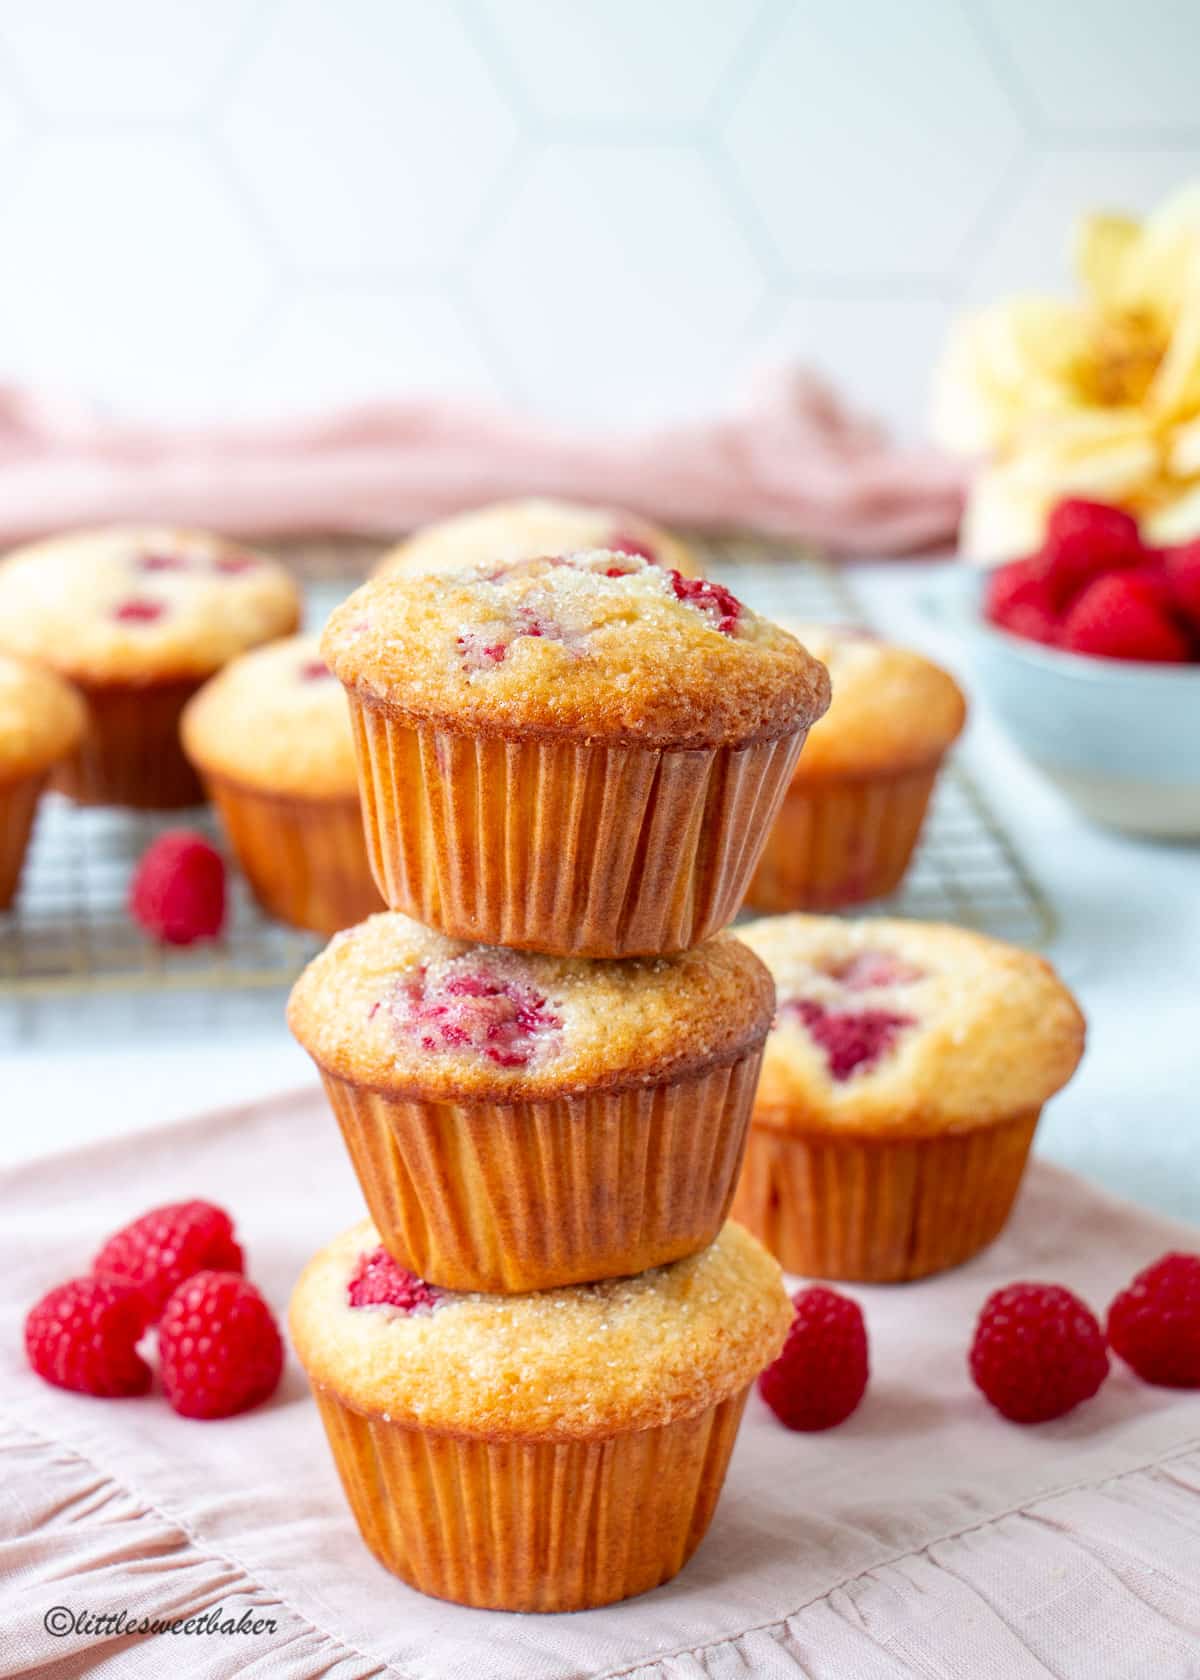 A tower of 3 raspberry muffins on a pink ruffle napkin.